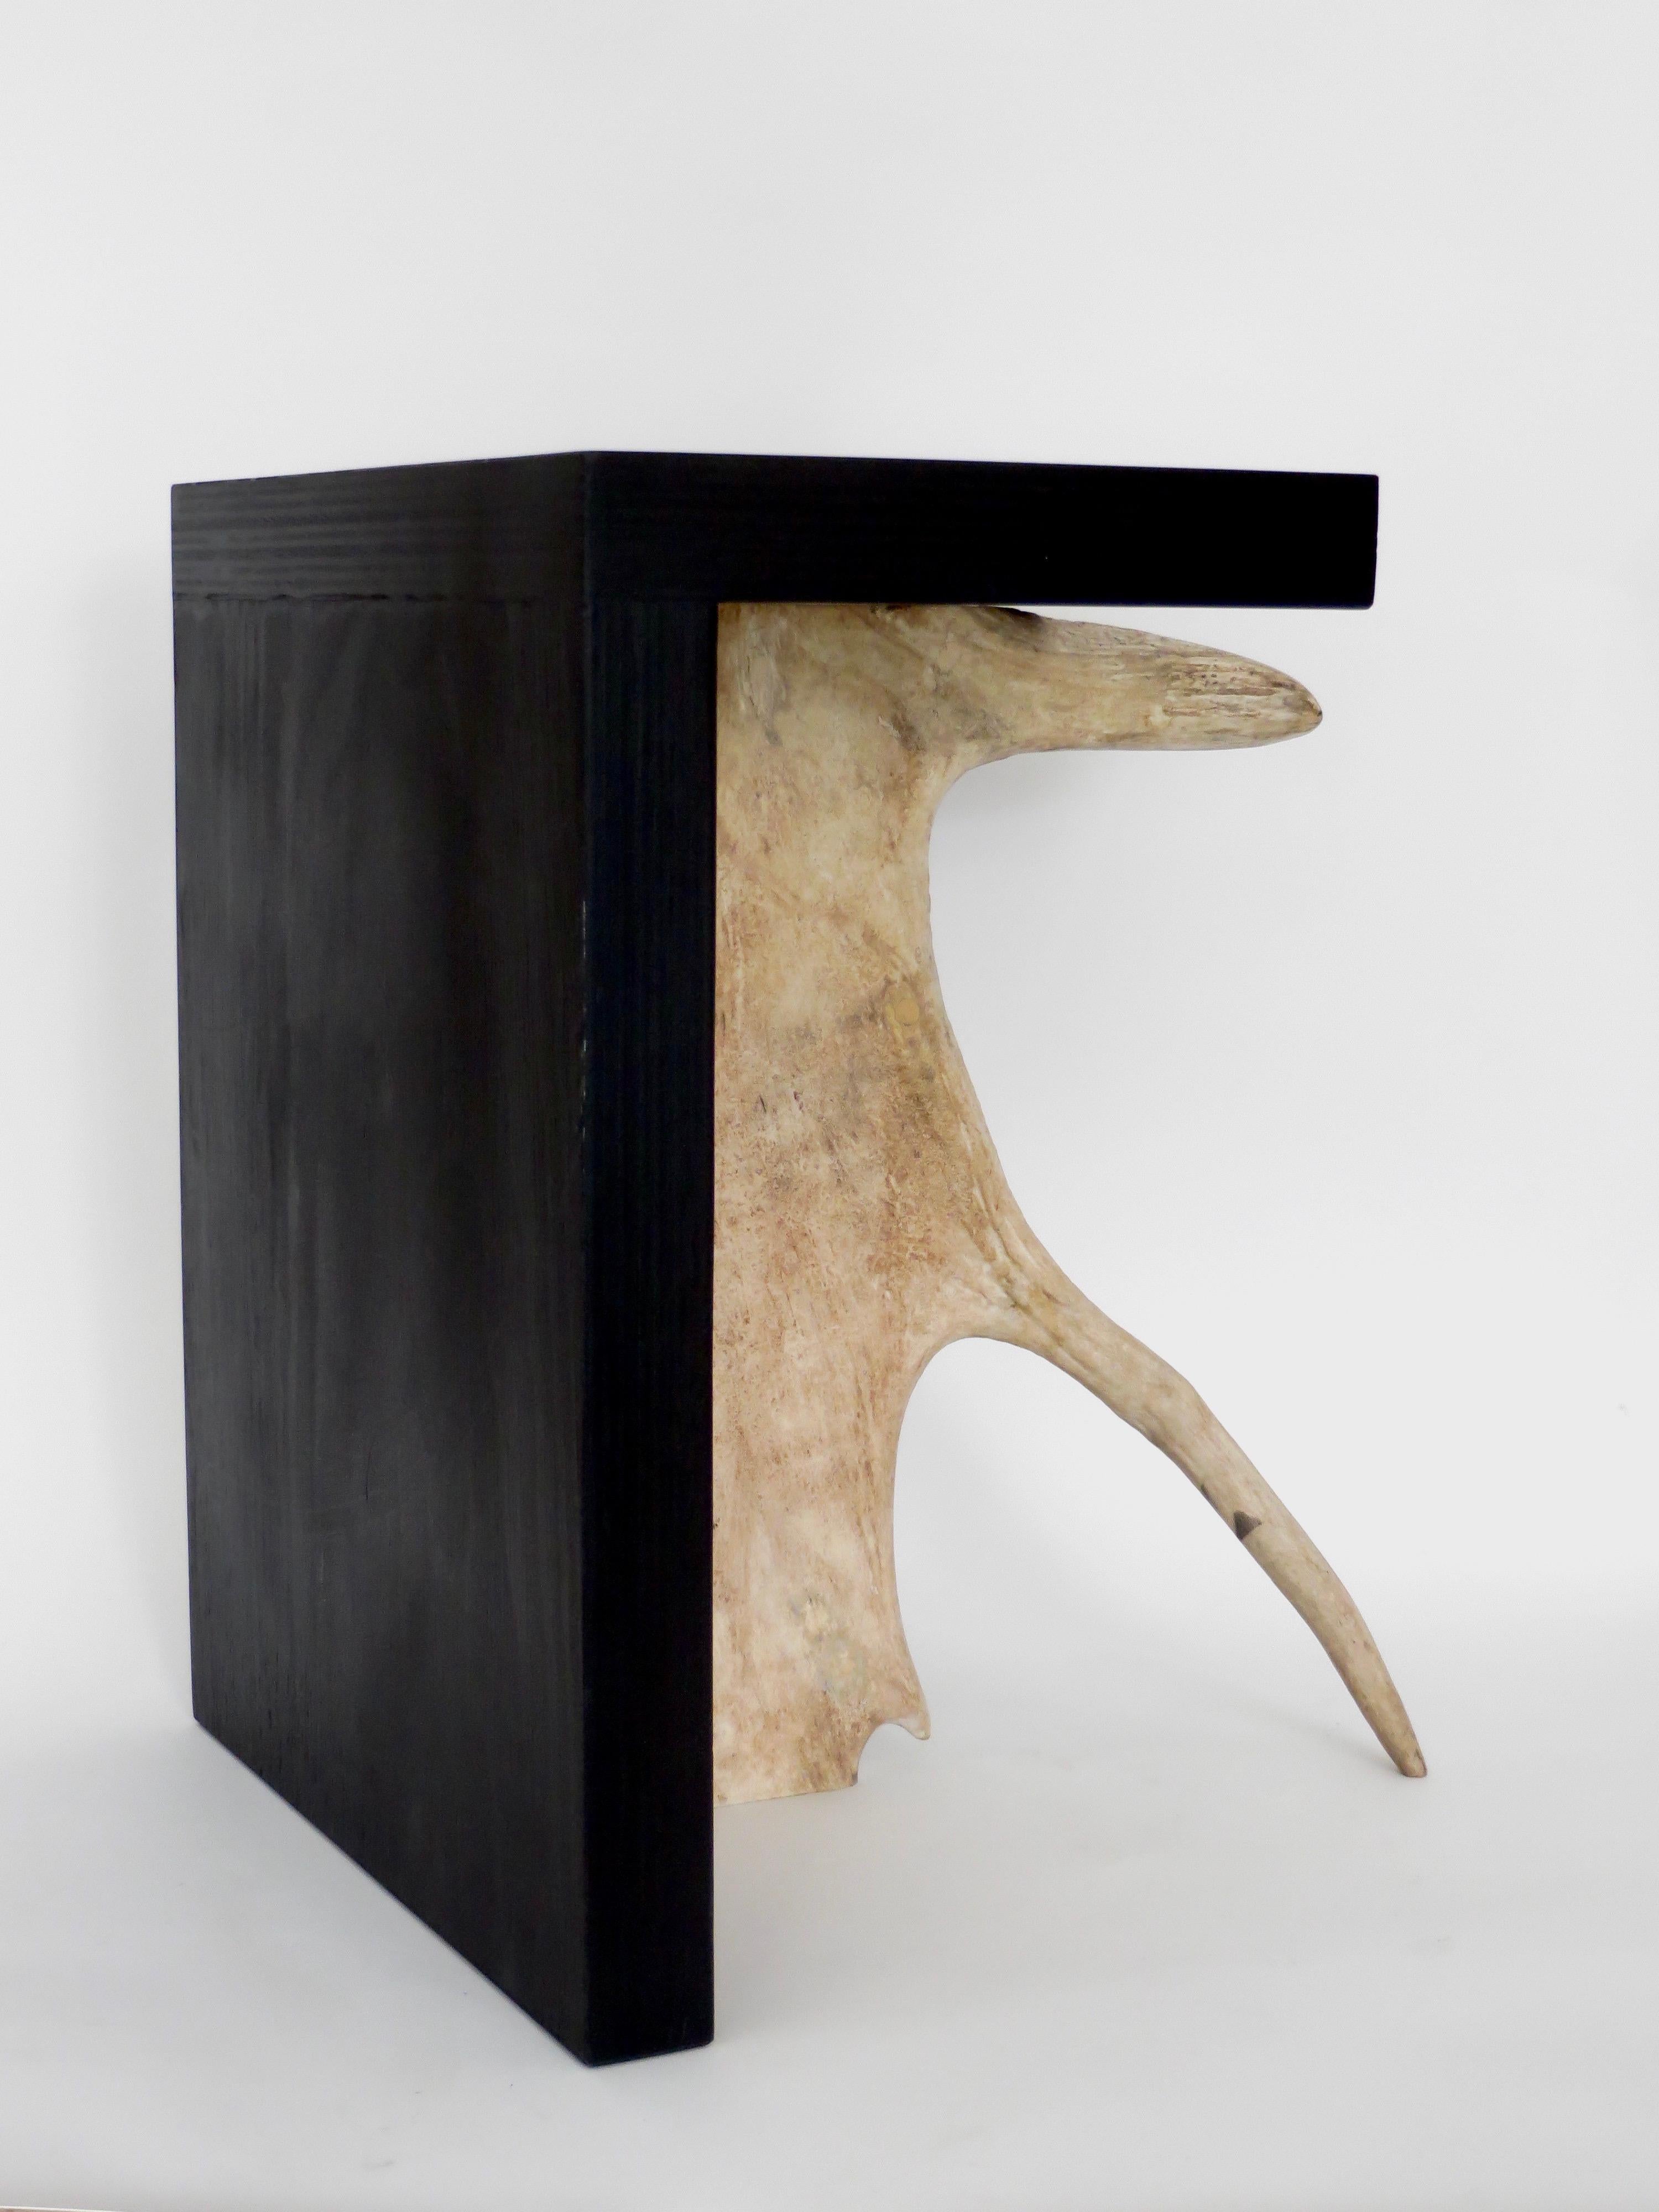 Black ebonized stained solid plywood forms with elk or moose antler.
Iconic Rick Owens use of natural and organic modern materials.
These are from the open edition series. 
Each stool is signed on the base and is a piece unique. 
May be used as